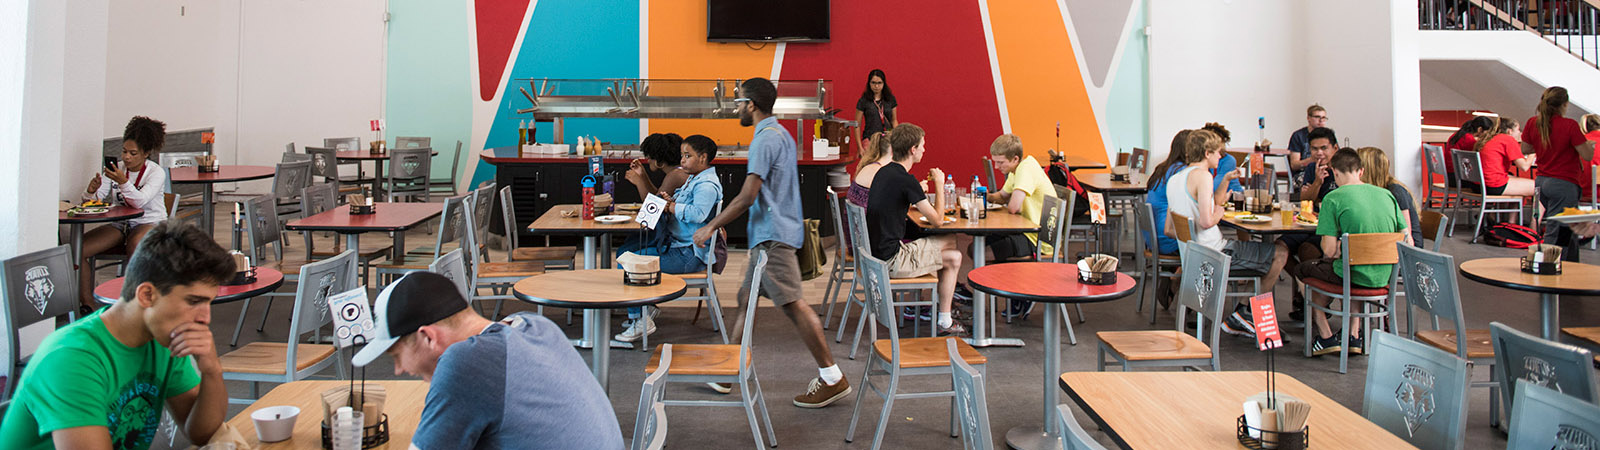 Campus Dining Banner Image